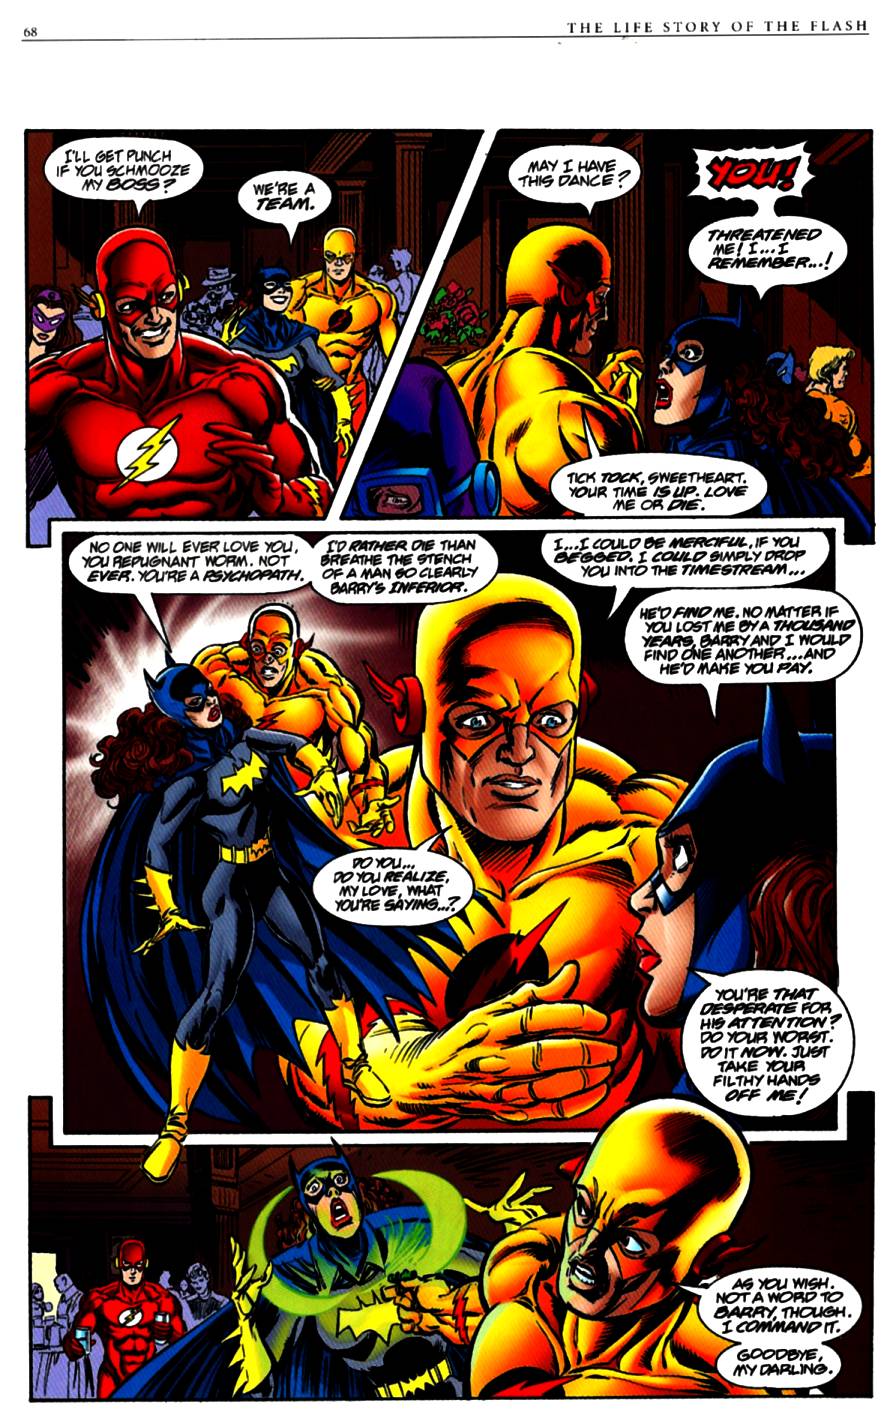 Read online The Life Story of the Flash comic -  Issue # Full - 70